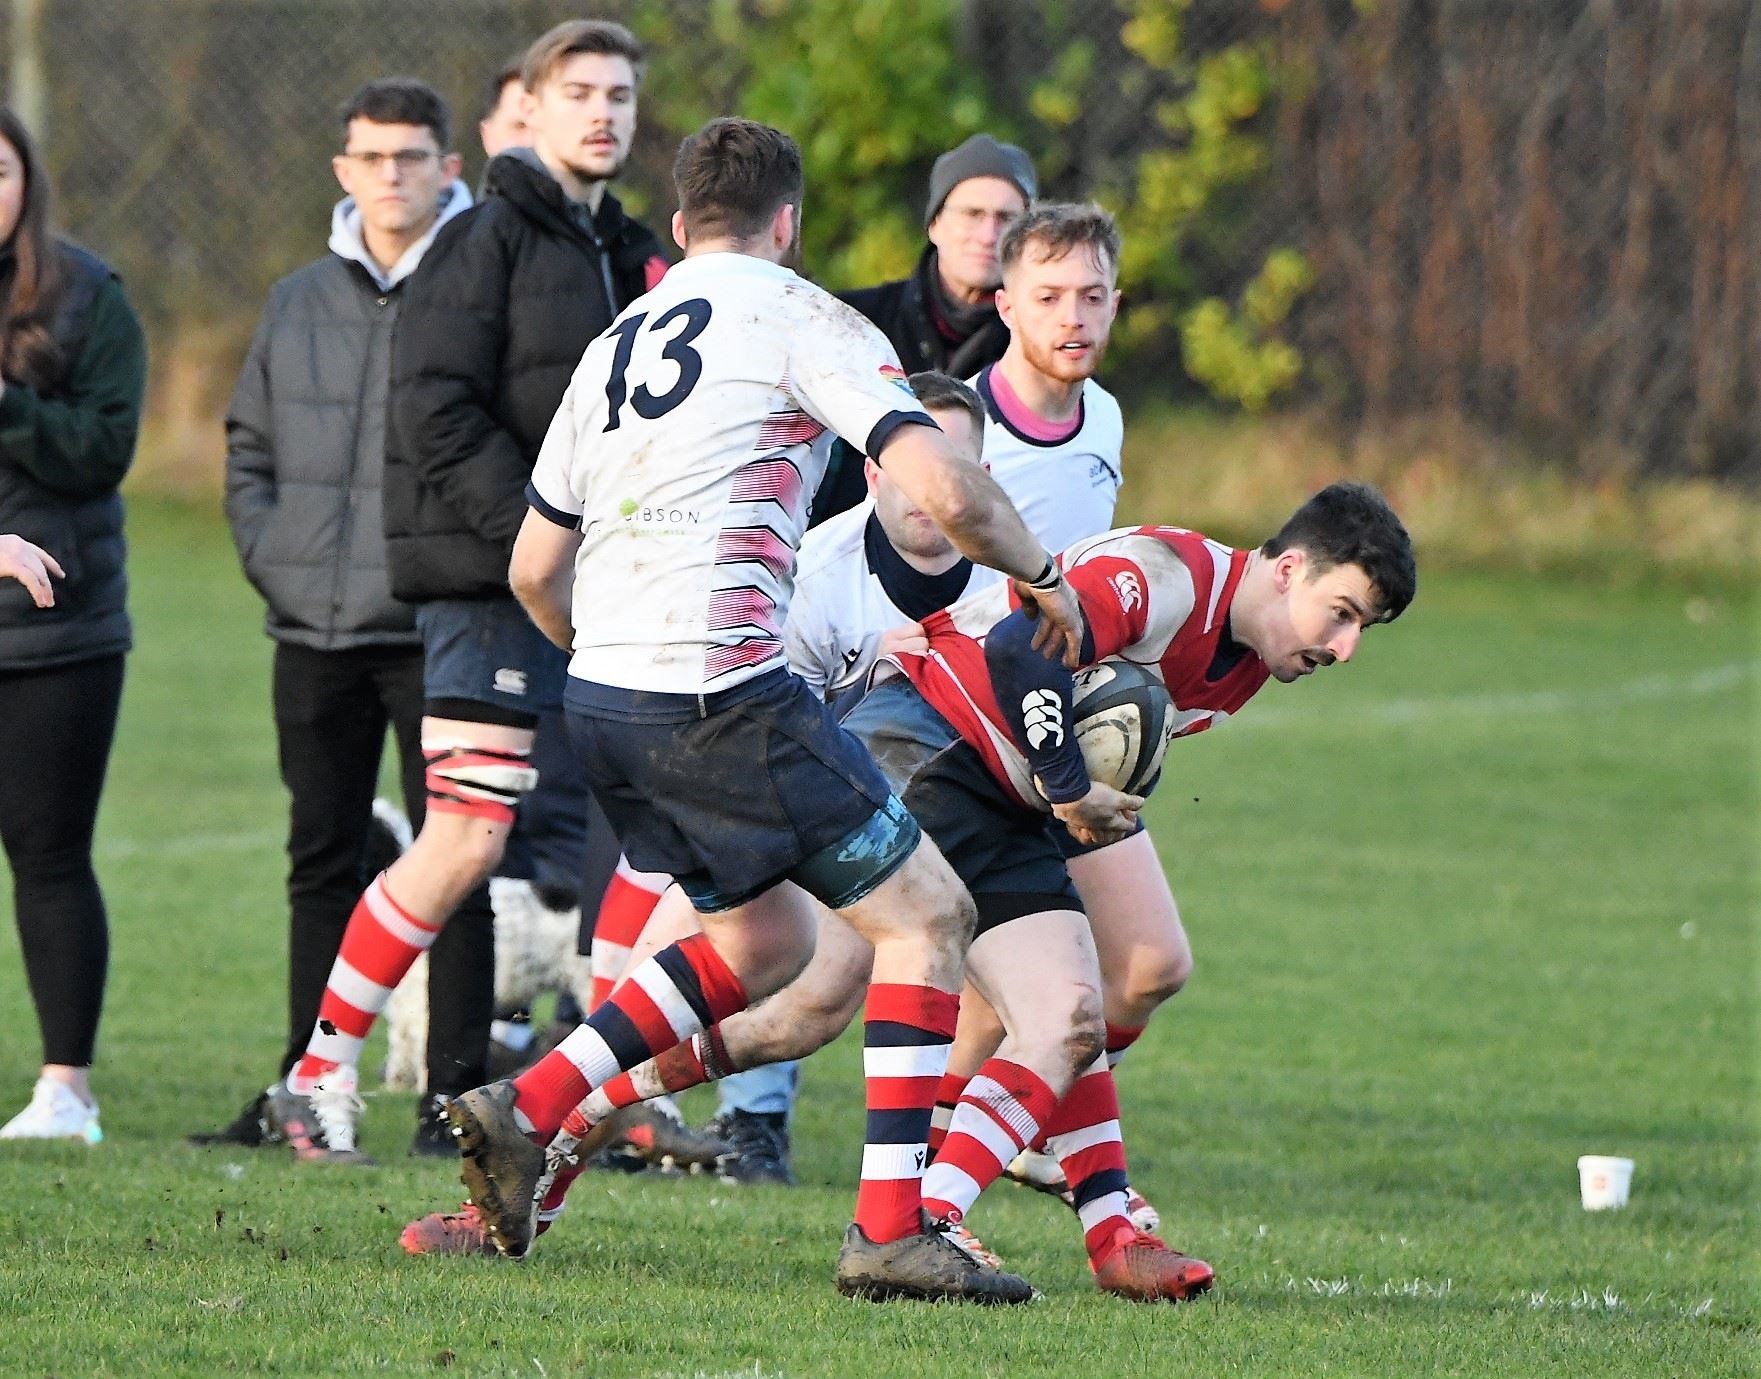 Calum Archibald takes on the home defence. Photo: James Officer